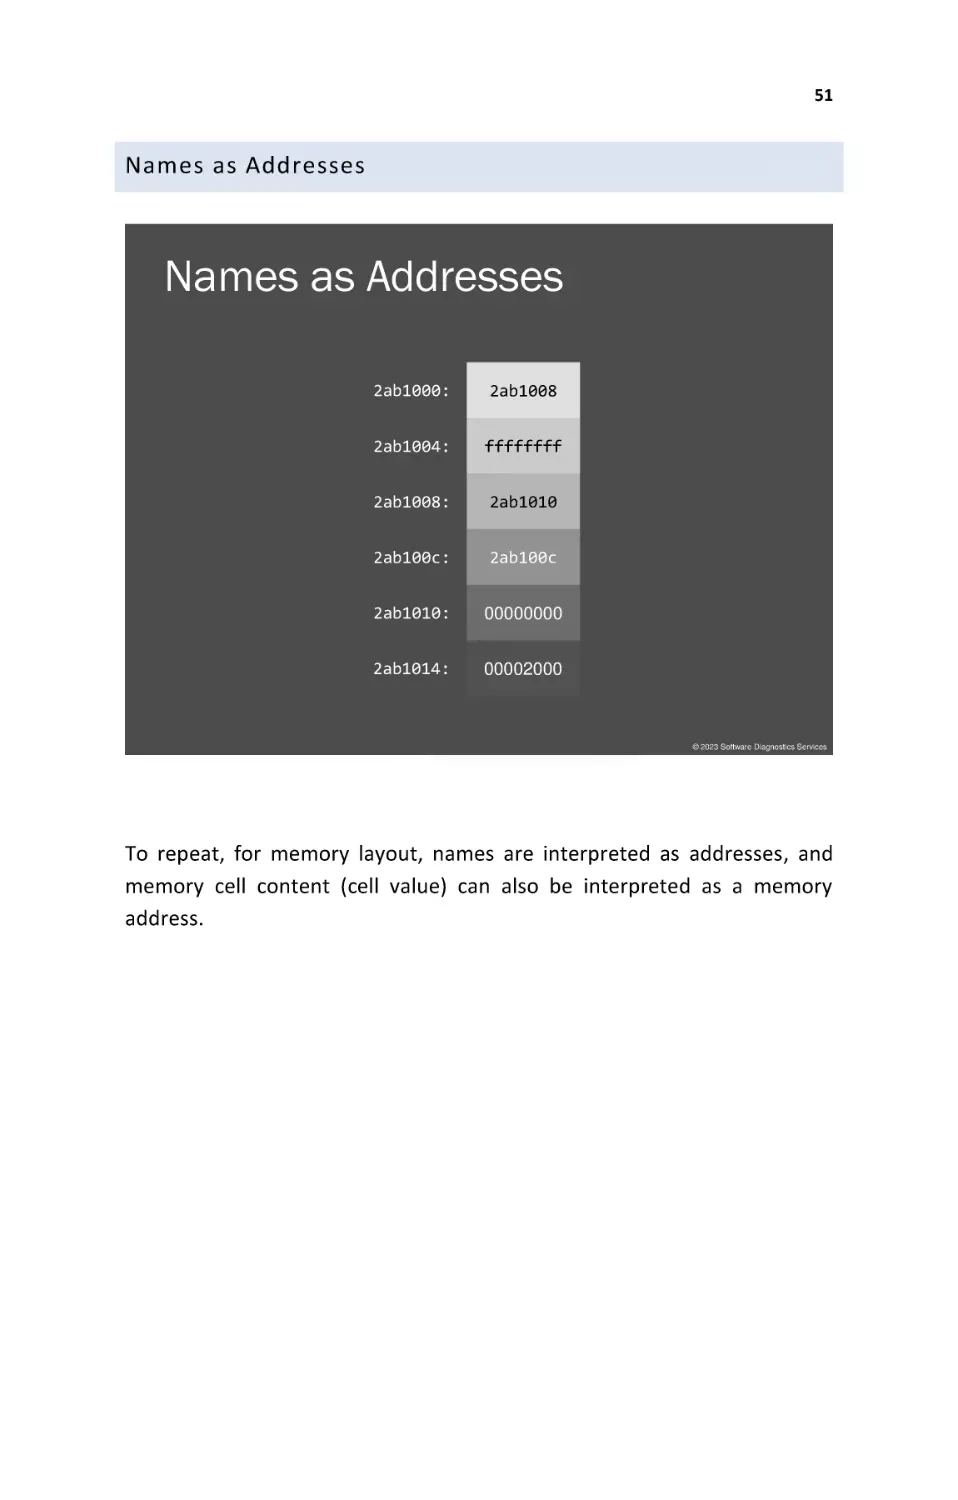 Names as Addresses